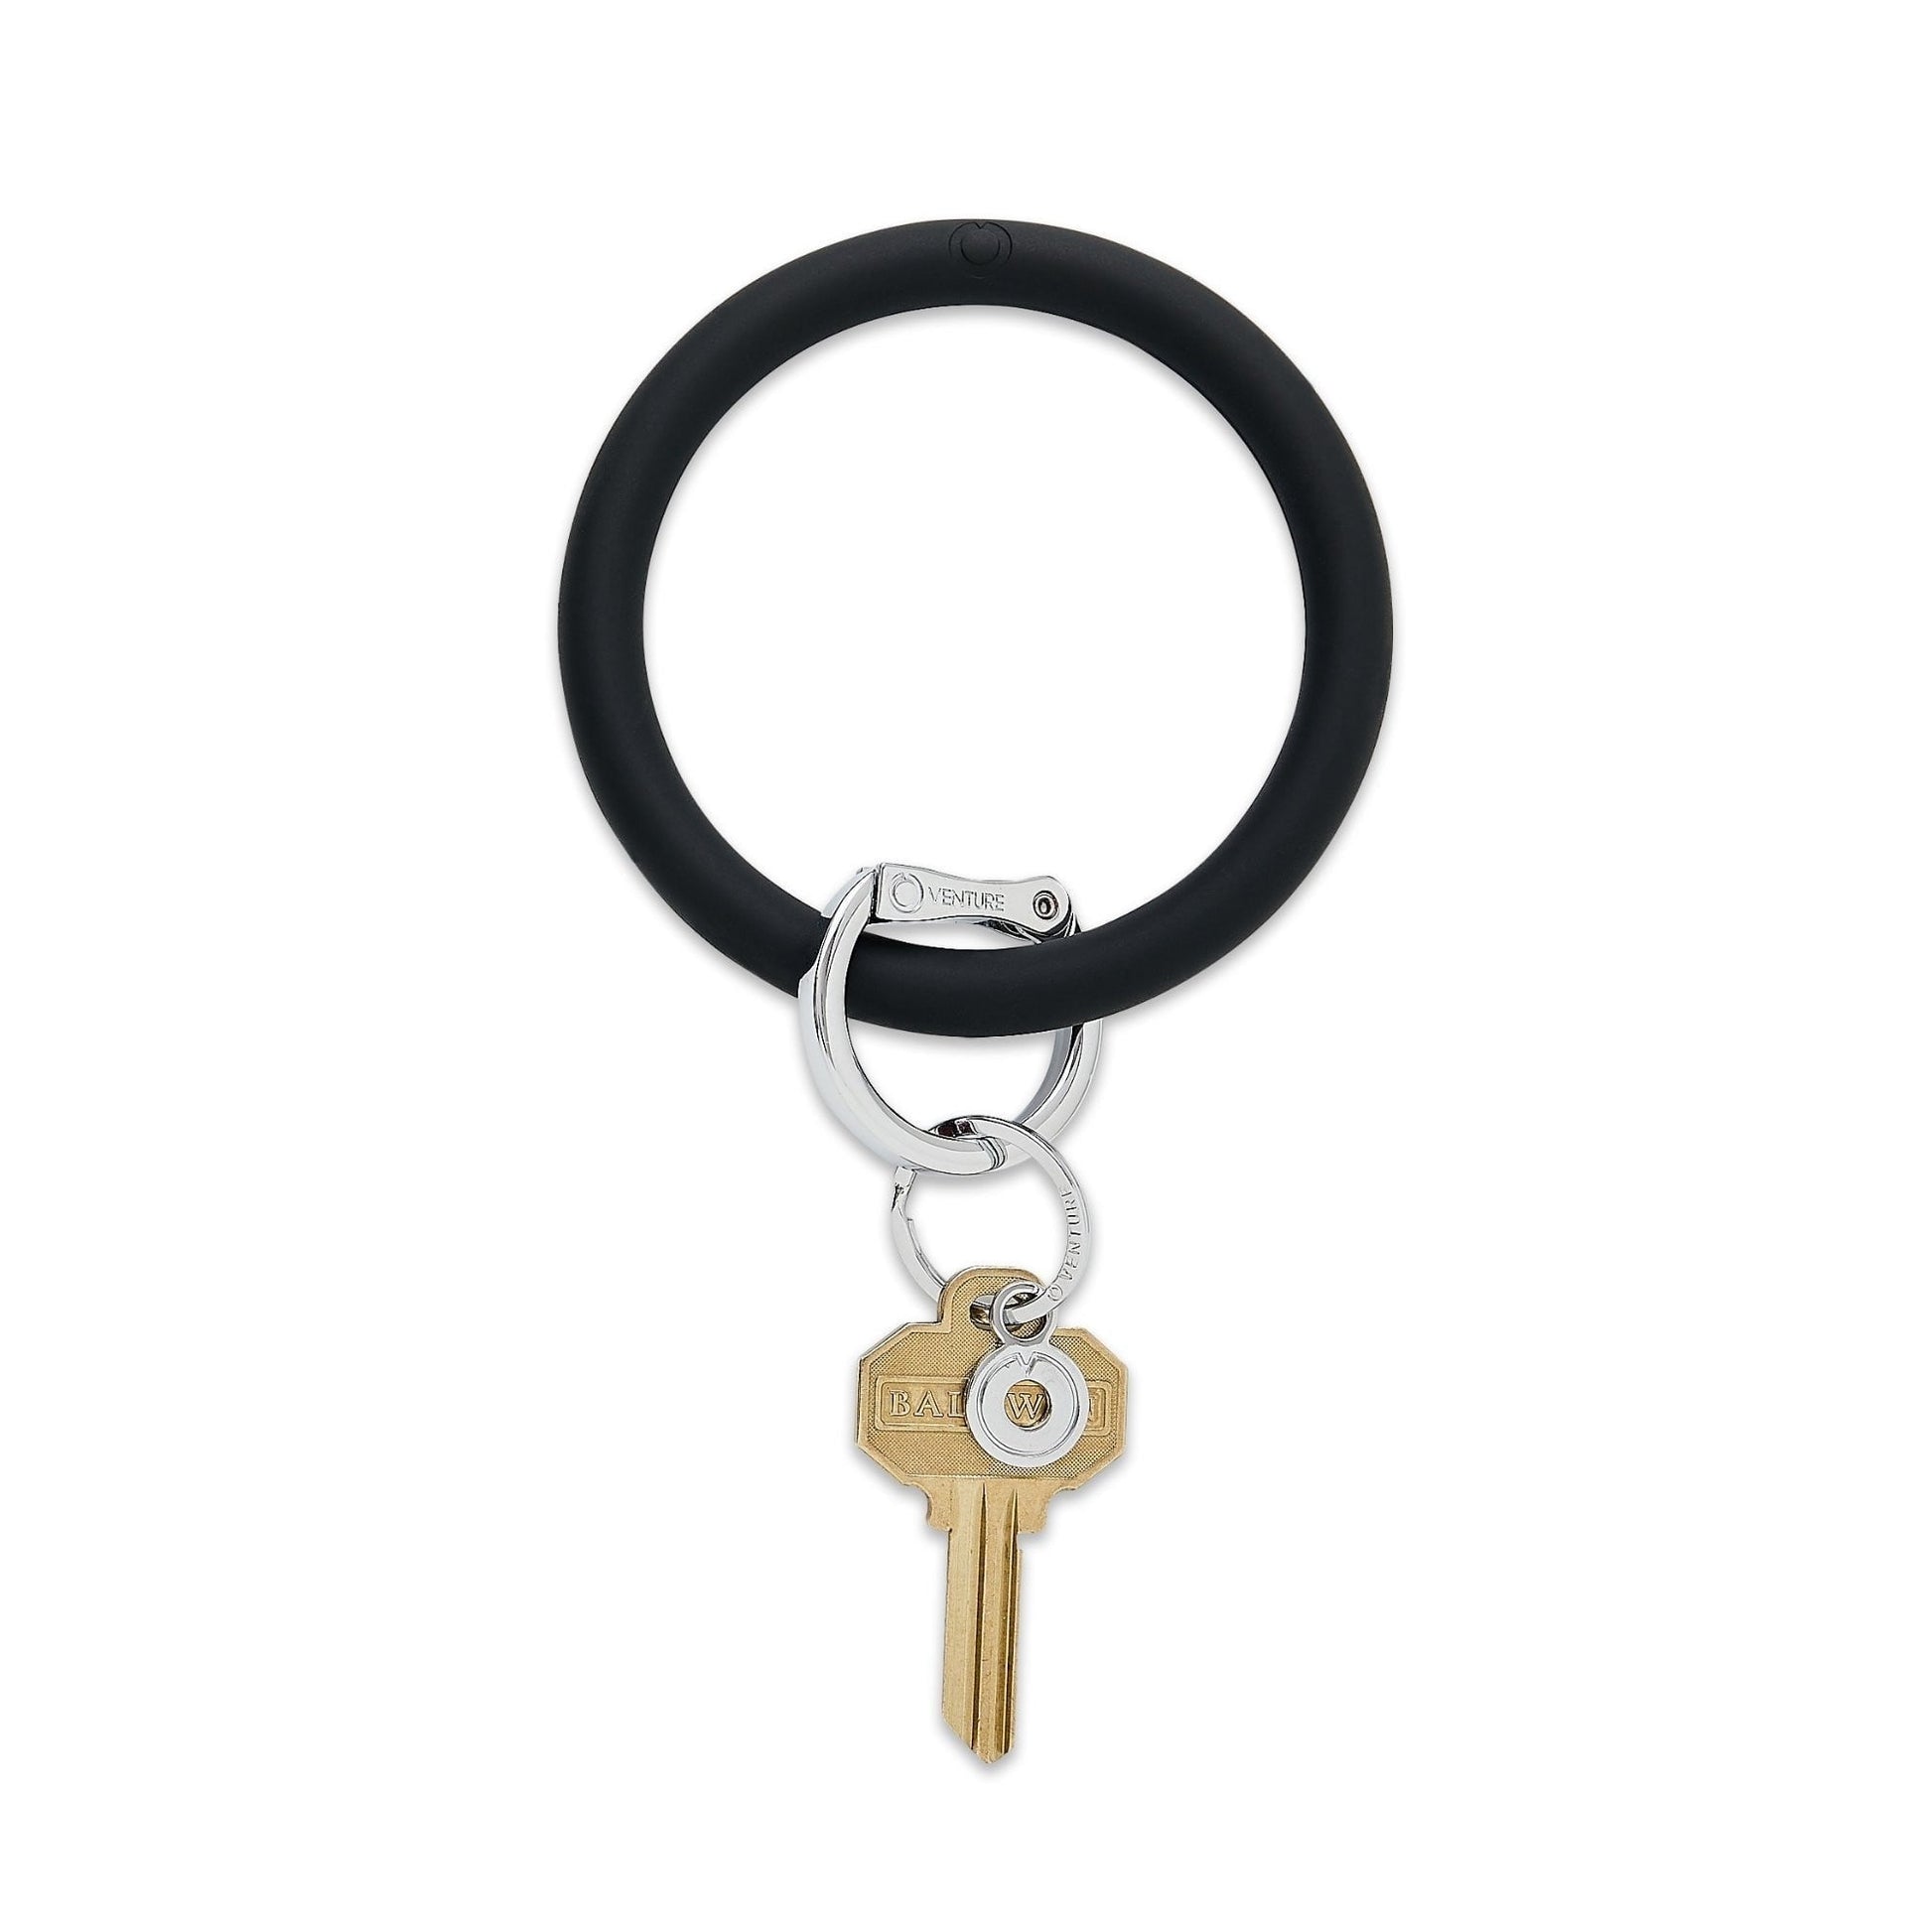 Oventure Silicone Big O Key Ring - Back in Black Braided